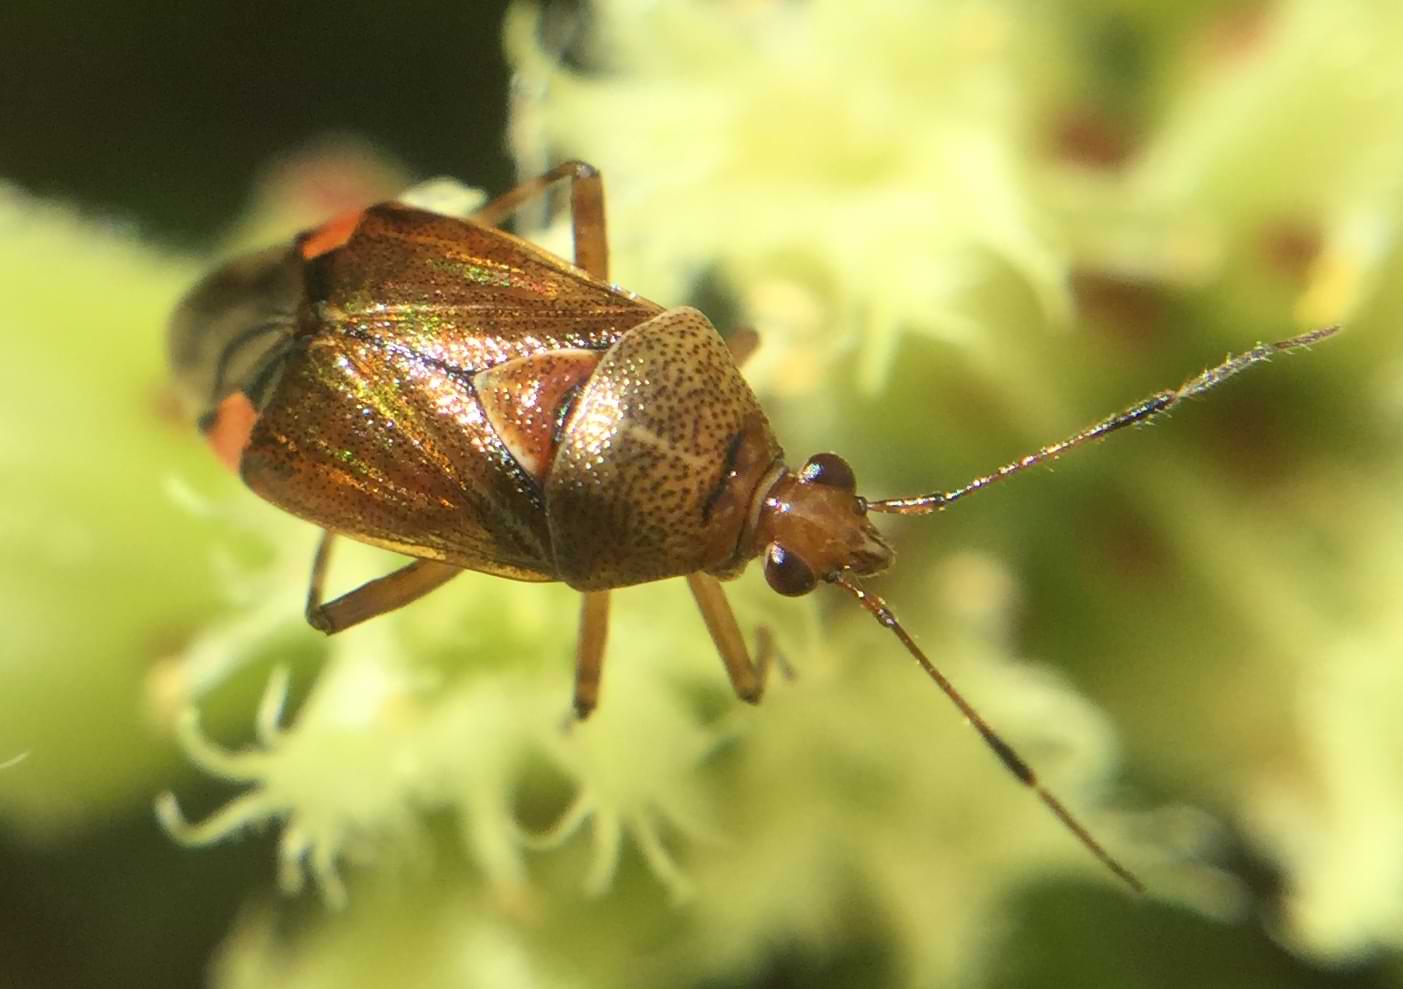 A bronze coloured bug with a very shiny body. It has a small head with two thin antennae and two round black eyes that are reflecting sunlight back at the camera.